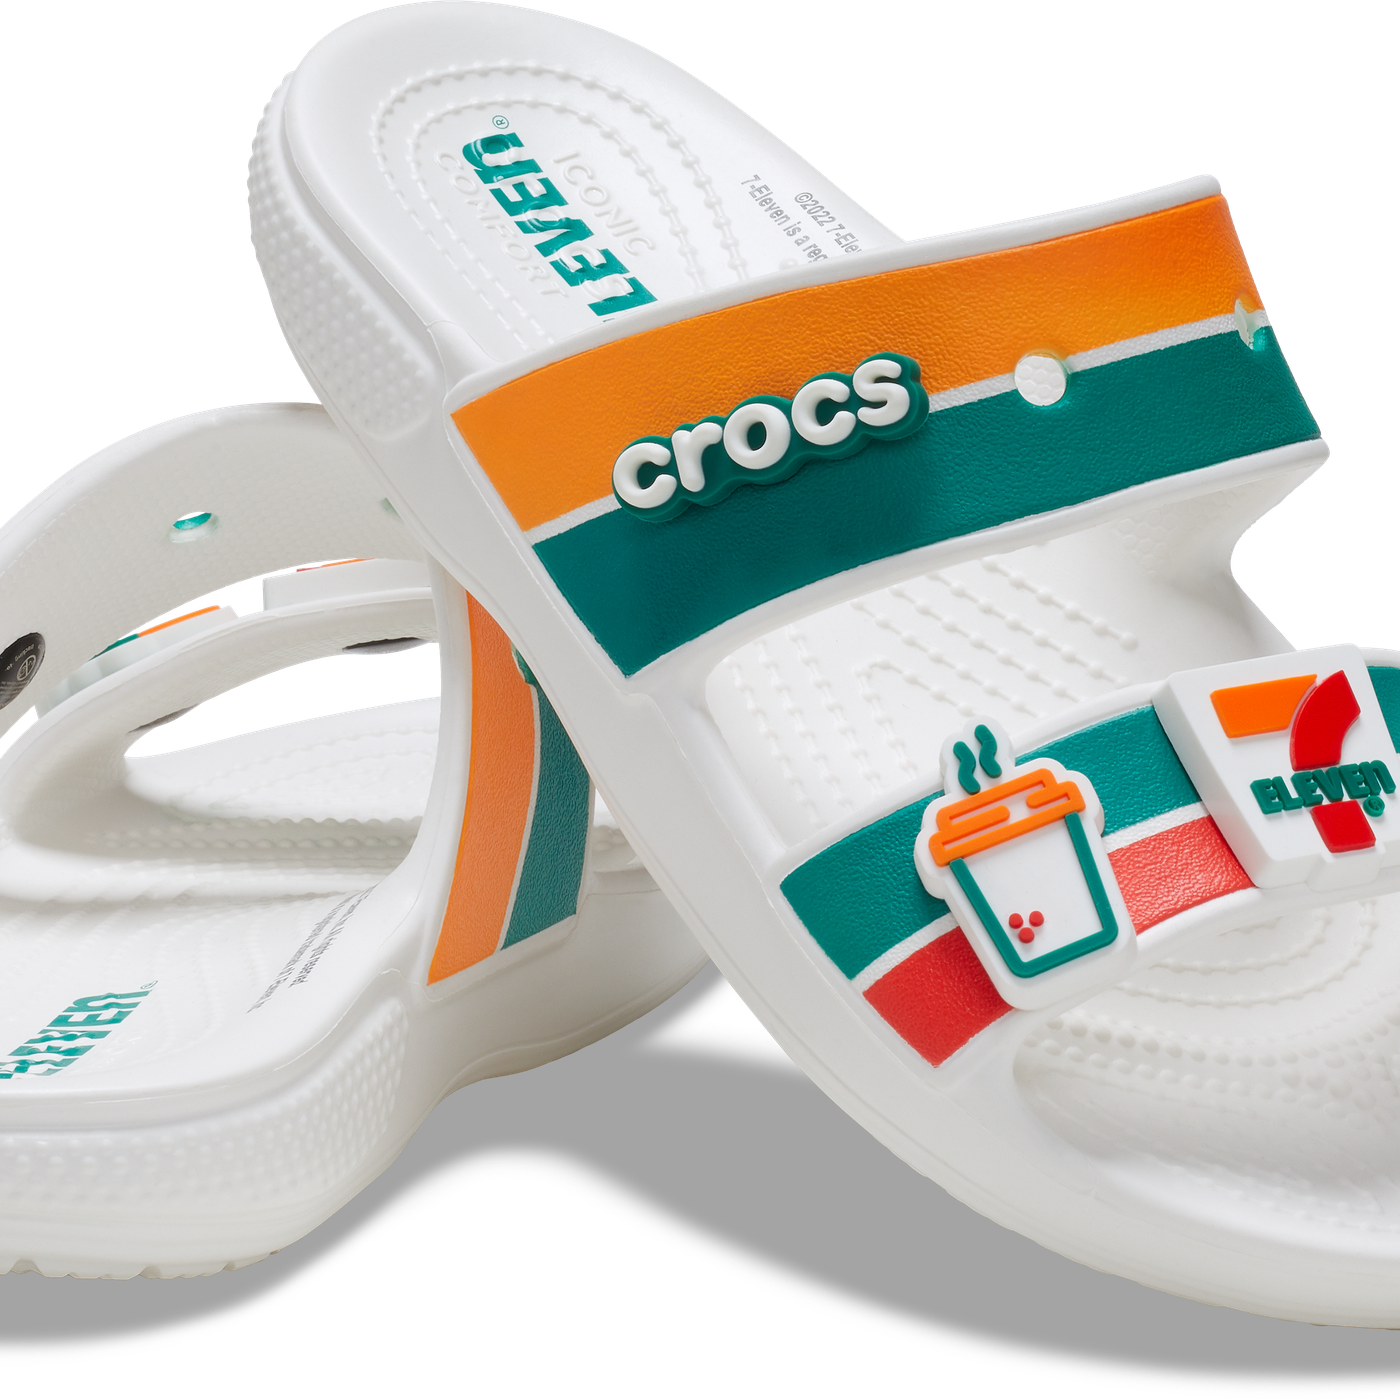 7-Eleven Announces with Crocs on Limited Edition Styles - Dallas